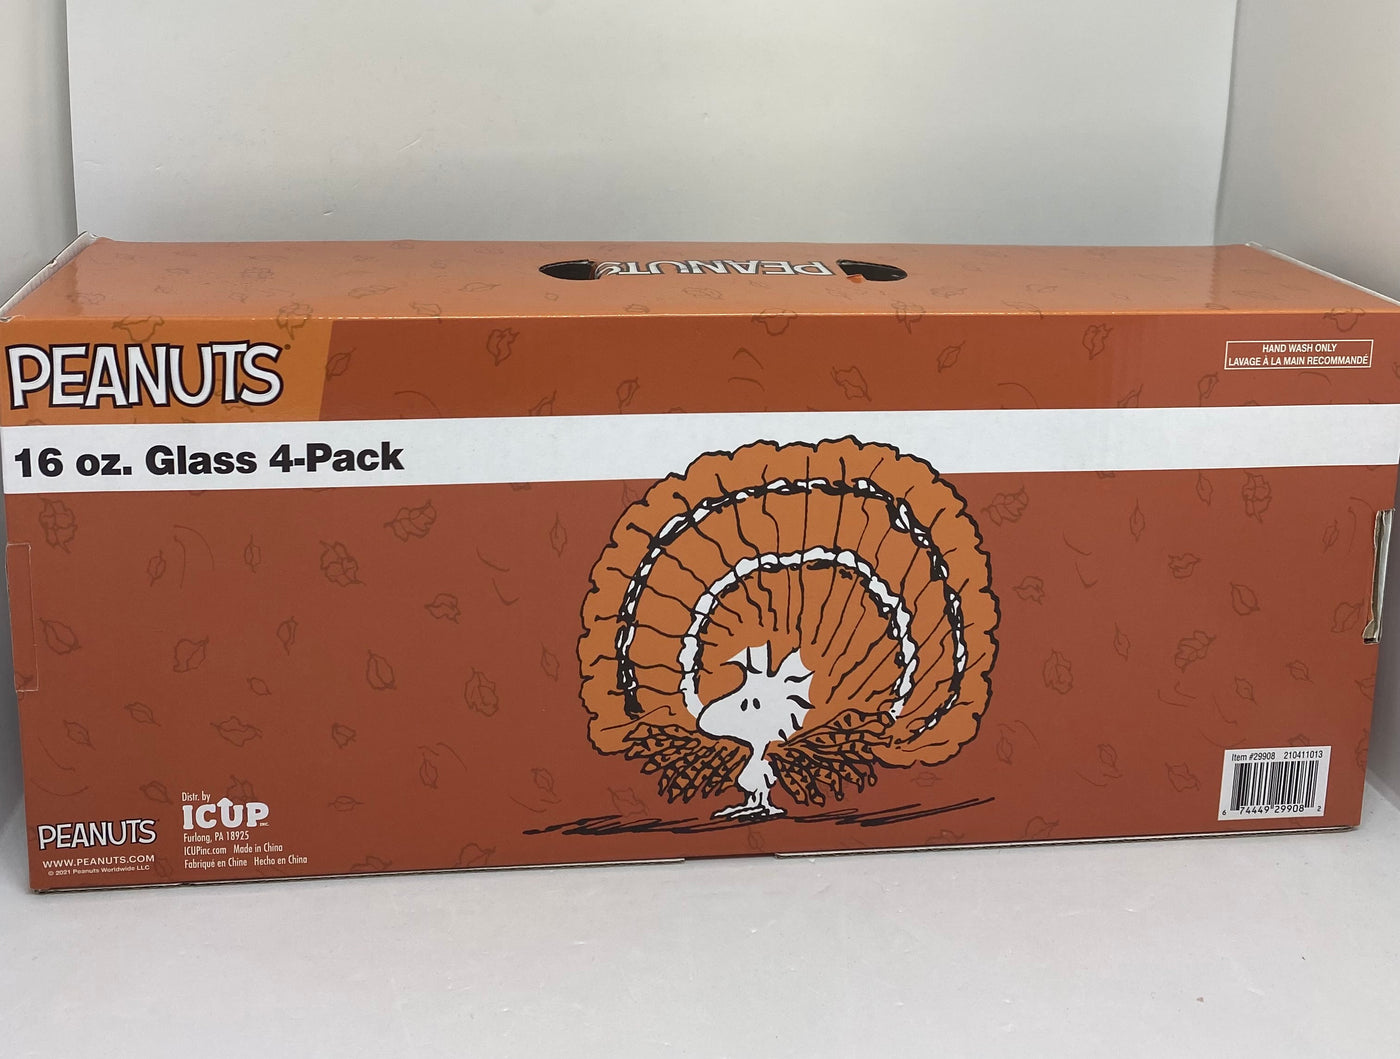 Peanuts Gang Snoopy Welcome Fall Autumn 16oz Glass Set of 4 New with Box